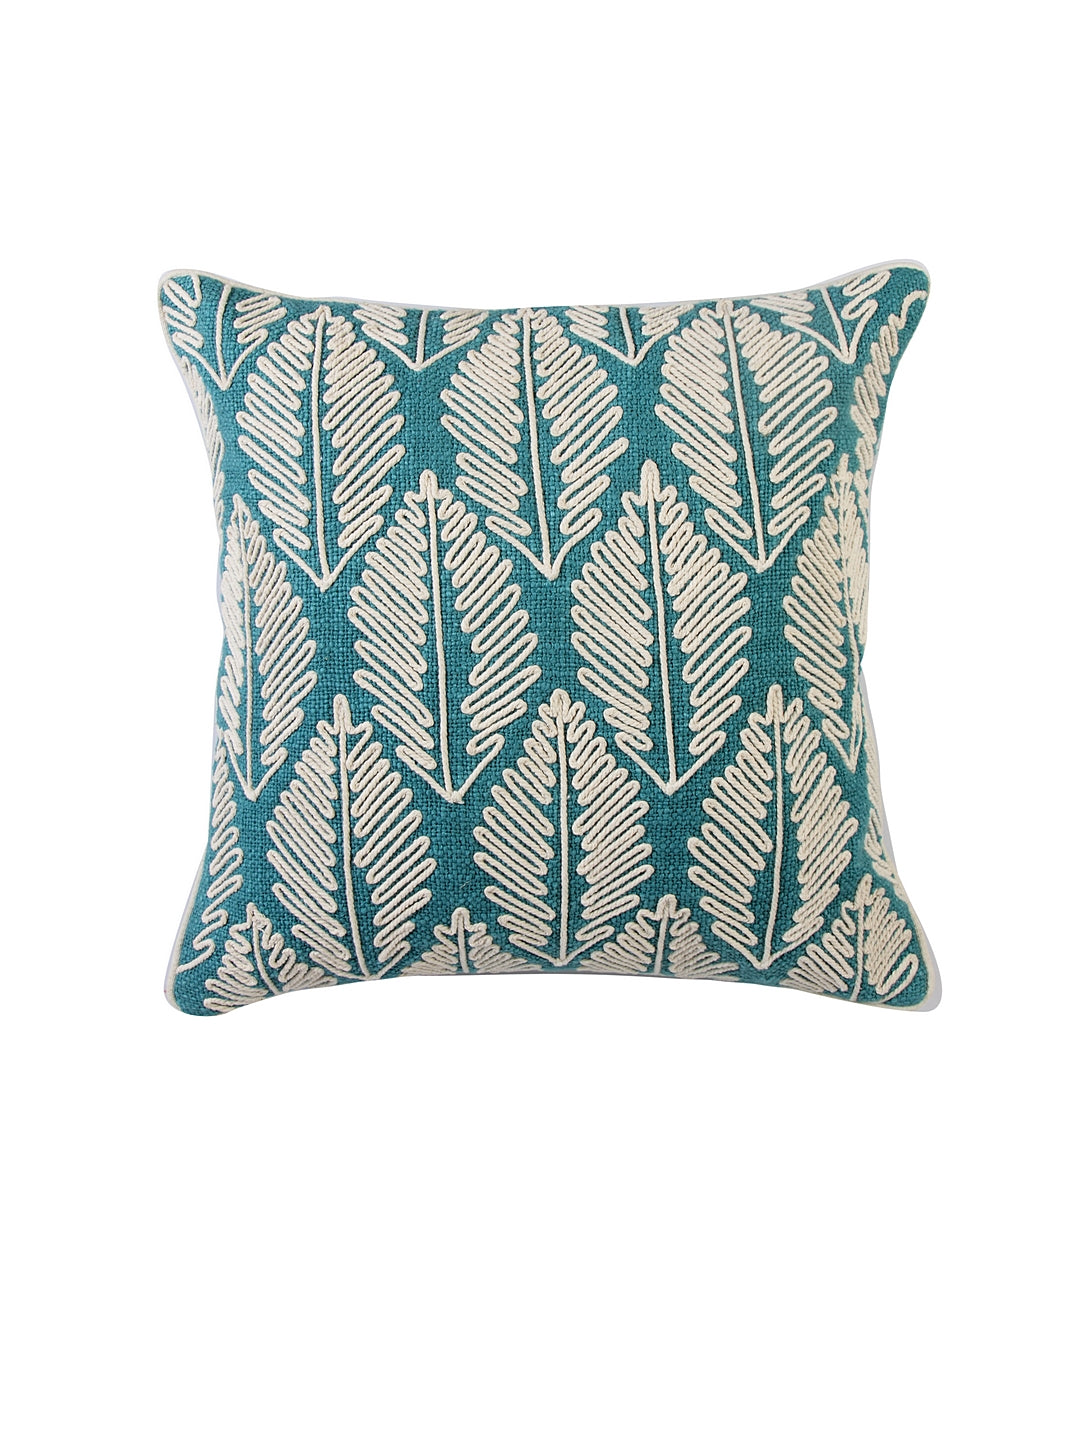 Blue Fern Embroidered Cushion Cover